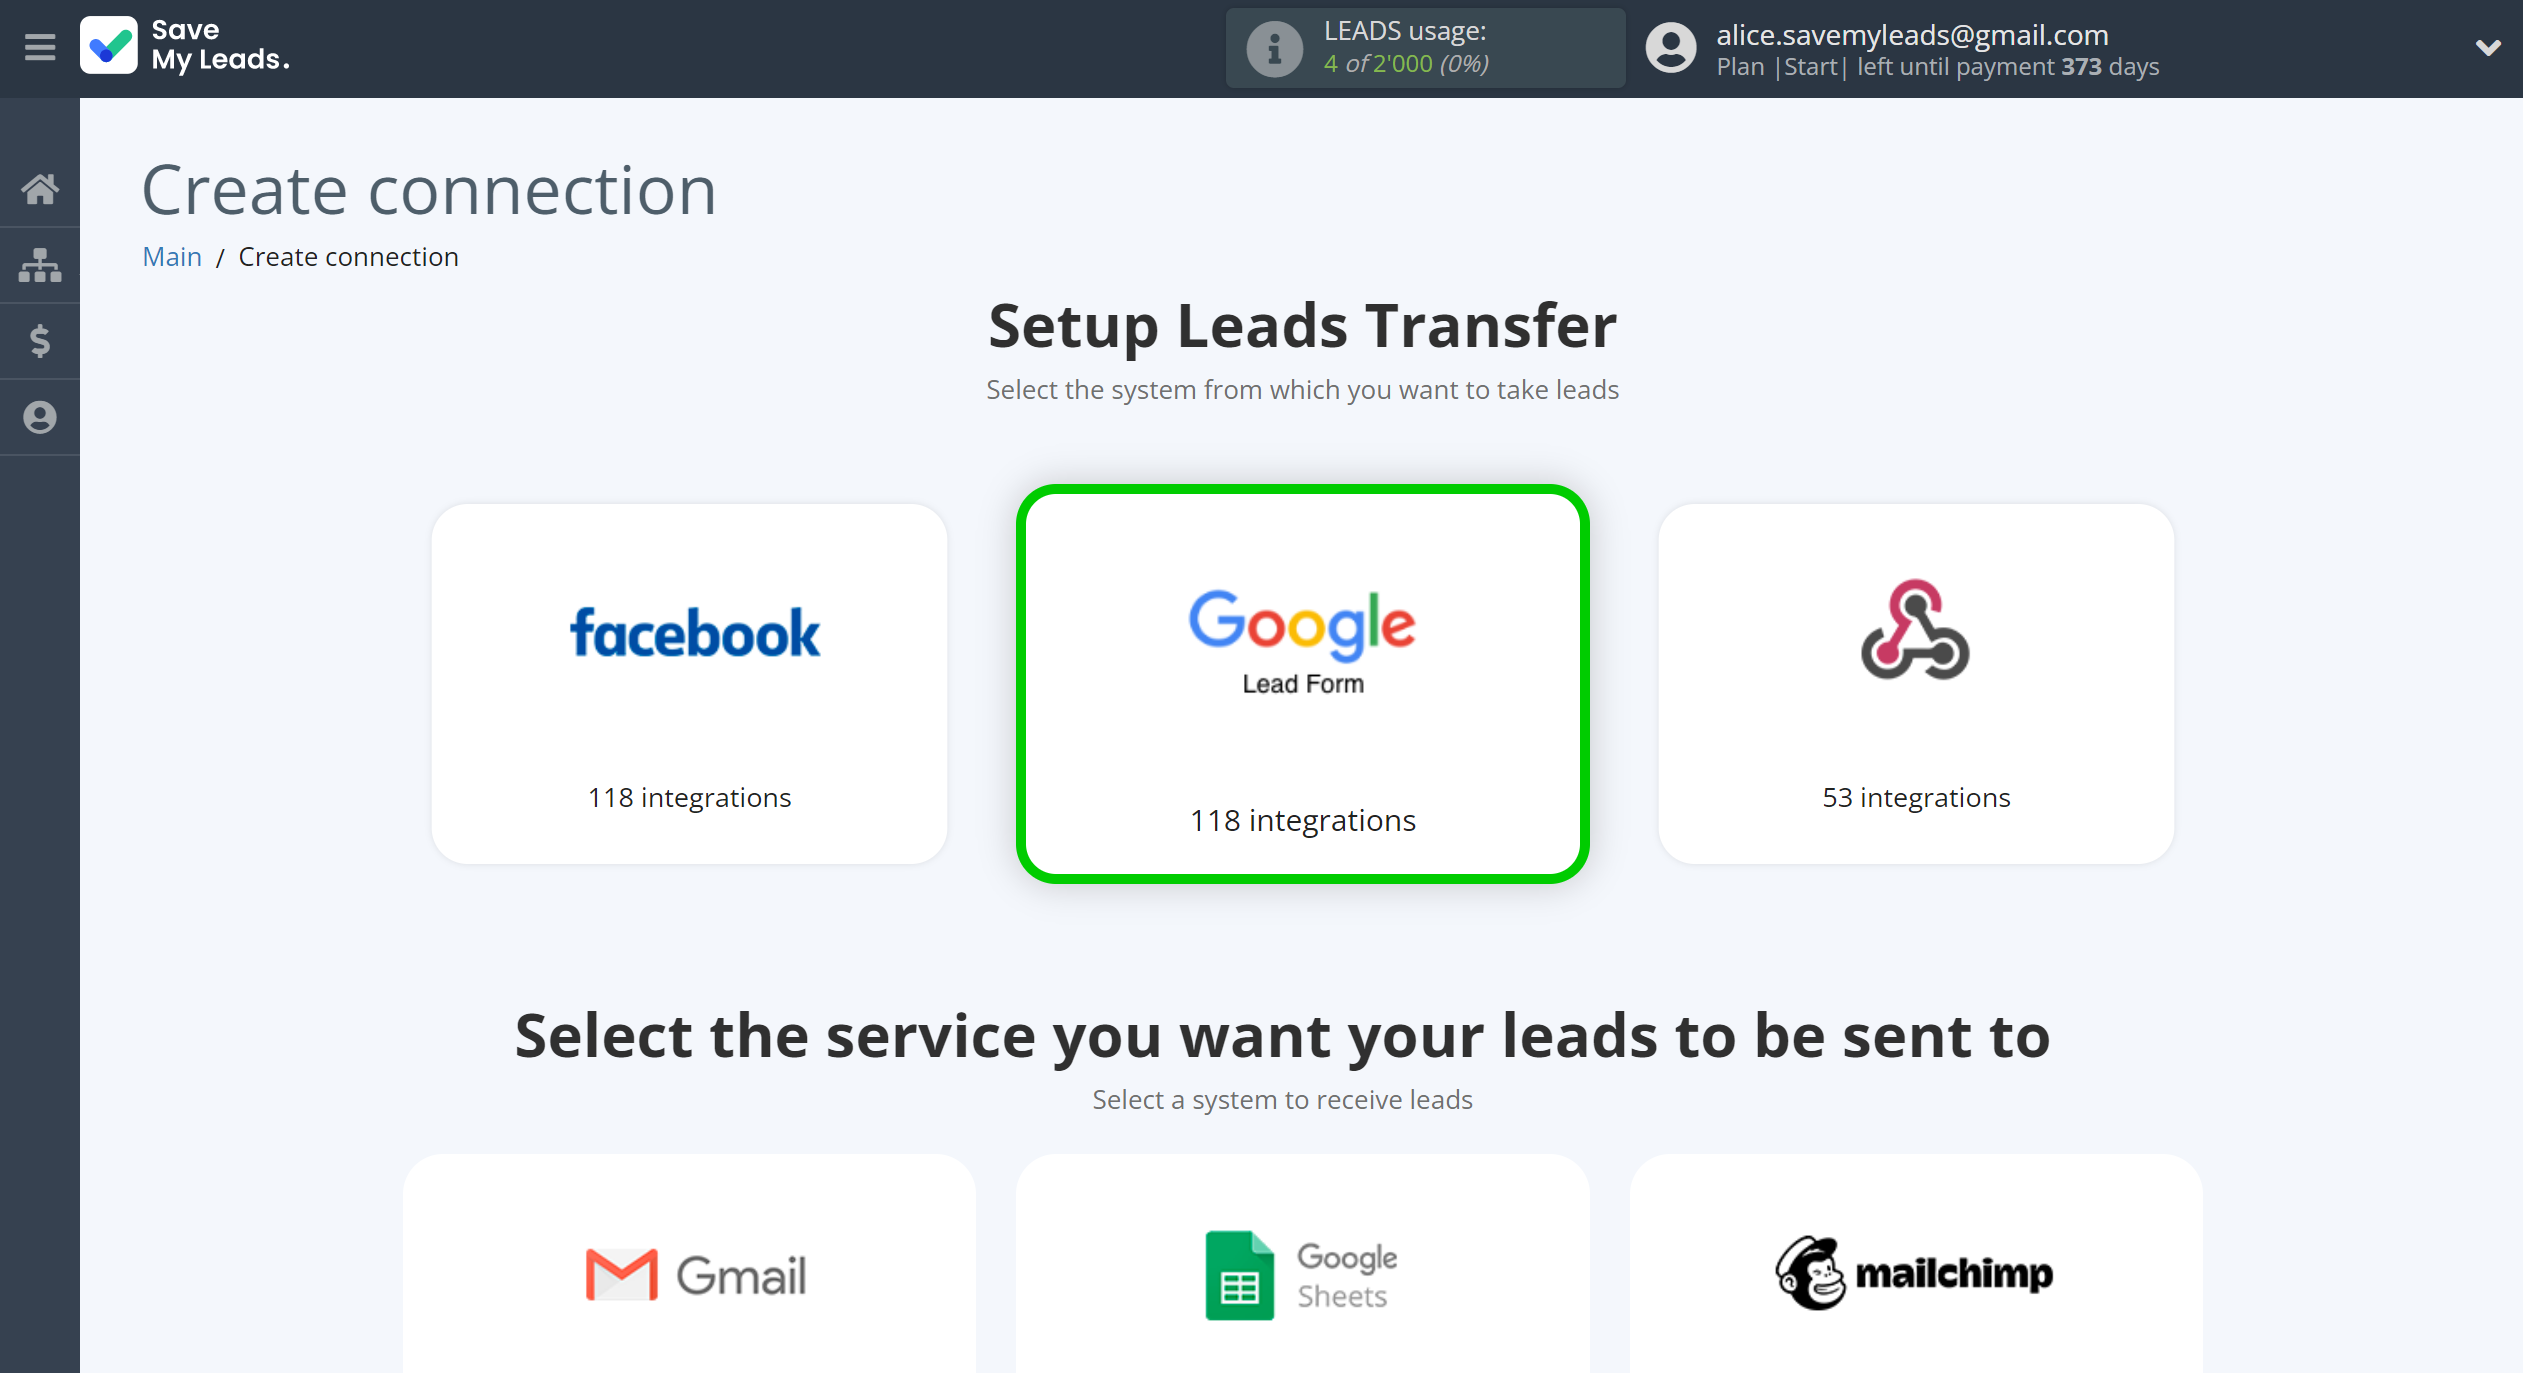 How to Connect Google Lead Form with Amazon DynamoDB | Data Source system selection